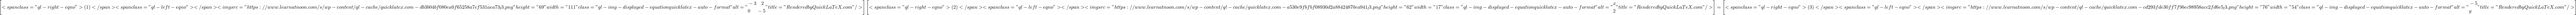 \[\left[ <span class="ql-right-eqno"> (1) </span><span class="ql-left-eqno">   </span><img src="https://www.learnatnoon.com/s/wp-content/ql-cache/quicklatex.com-db3b04bf080ea0f65258a7ef531aea73_l3.png" height="69" width="111" class="ql-img-displayed-equation quicklatex-auto-format" alt="\begin{align*}   & -3\,\,\,\,\,\,2 \\   & 0\,\,\,\,\,\,\,\,-5 \\  \end{align*}" title="Rendered by QuickLaTeX.com"/> \right]\left[ <span class="ql-right-eqno"> (2) </span><span class="ql-left-eqno">   </span><img src="https://www.learnatnoon.com/s/wp-content/ql-cache/quicklatex.com-a530e9fbfbf08930d2a88424870ea941_l3.png" height="62" width="17" class="ql-img-displayed-equation quicklatex-auto-format" alt="\begin{align*}   & x \\   & 2 \\  \end{align*}" title="Rendered by QuickLaTeX.com"/> \right]=\left[ <span class="ql-right-eqno"> (3) </span><span class="ql-left-eqno">   </span><img src="https://www.learnatnoon.com/s/wp-content/ql-cache/quicklatex.com-cd293fde30ff7f9bec98958acc2fd6e5_l3.png" height="76" width="54" class="ql-img-displayed-equation quicklatex-auto-format" alt="\begin{align*}   & -5 \\   & y \\  \end{align*}" title="Rendered by QuickLaTeX.com"/> \right]\]